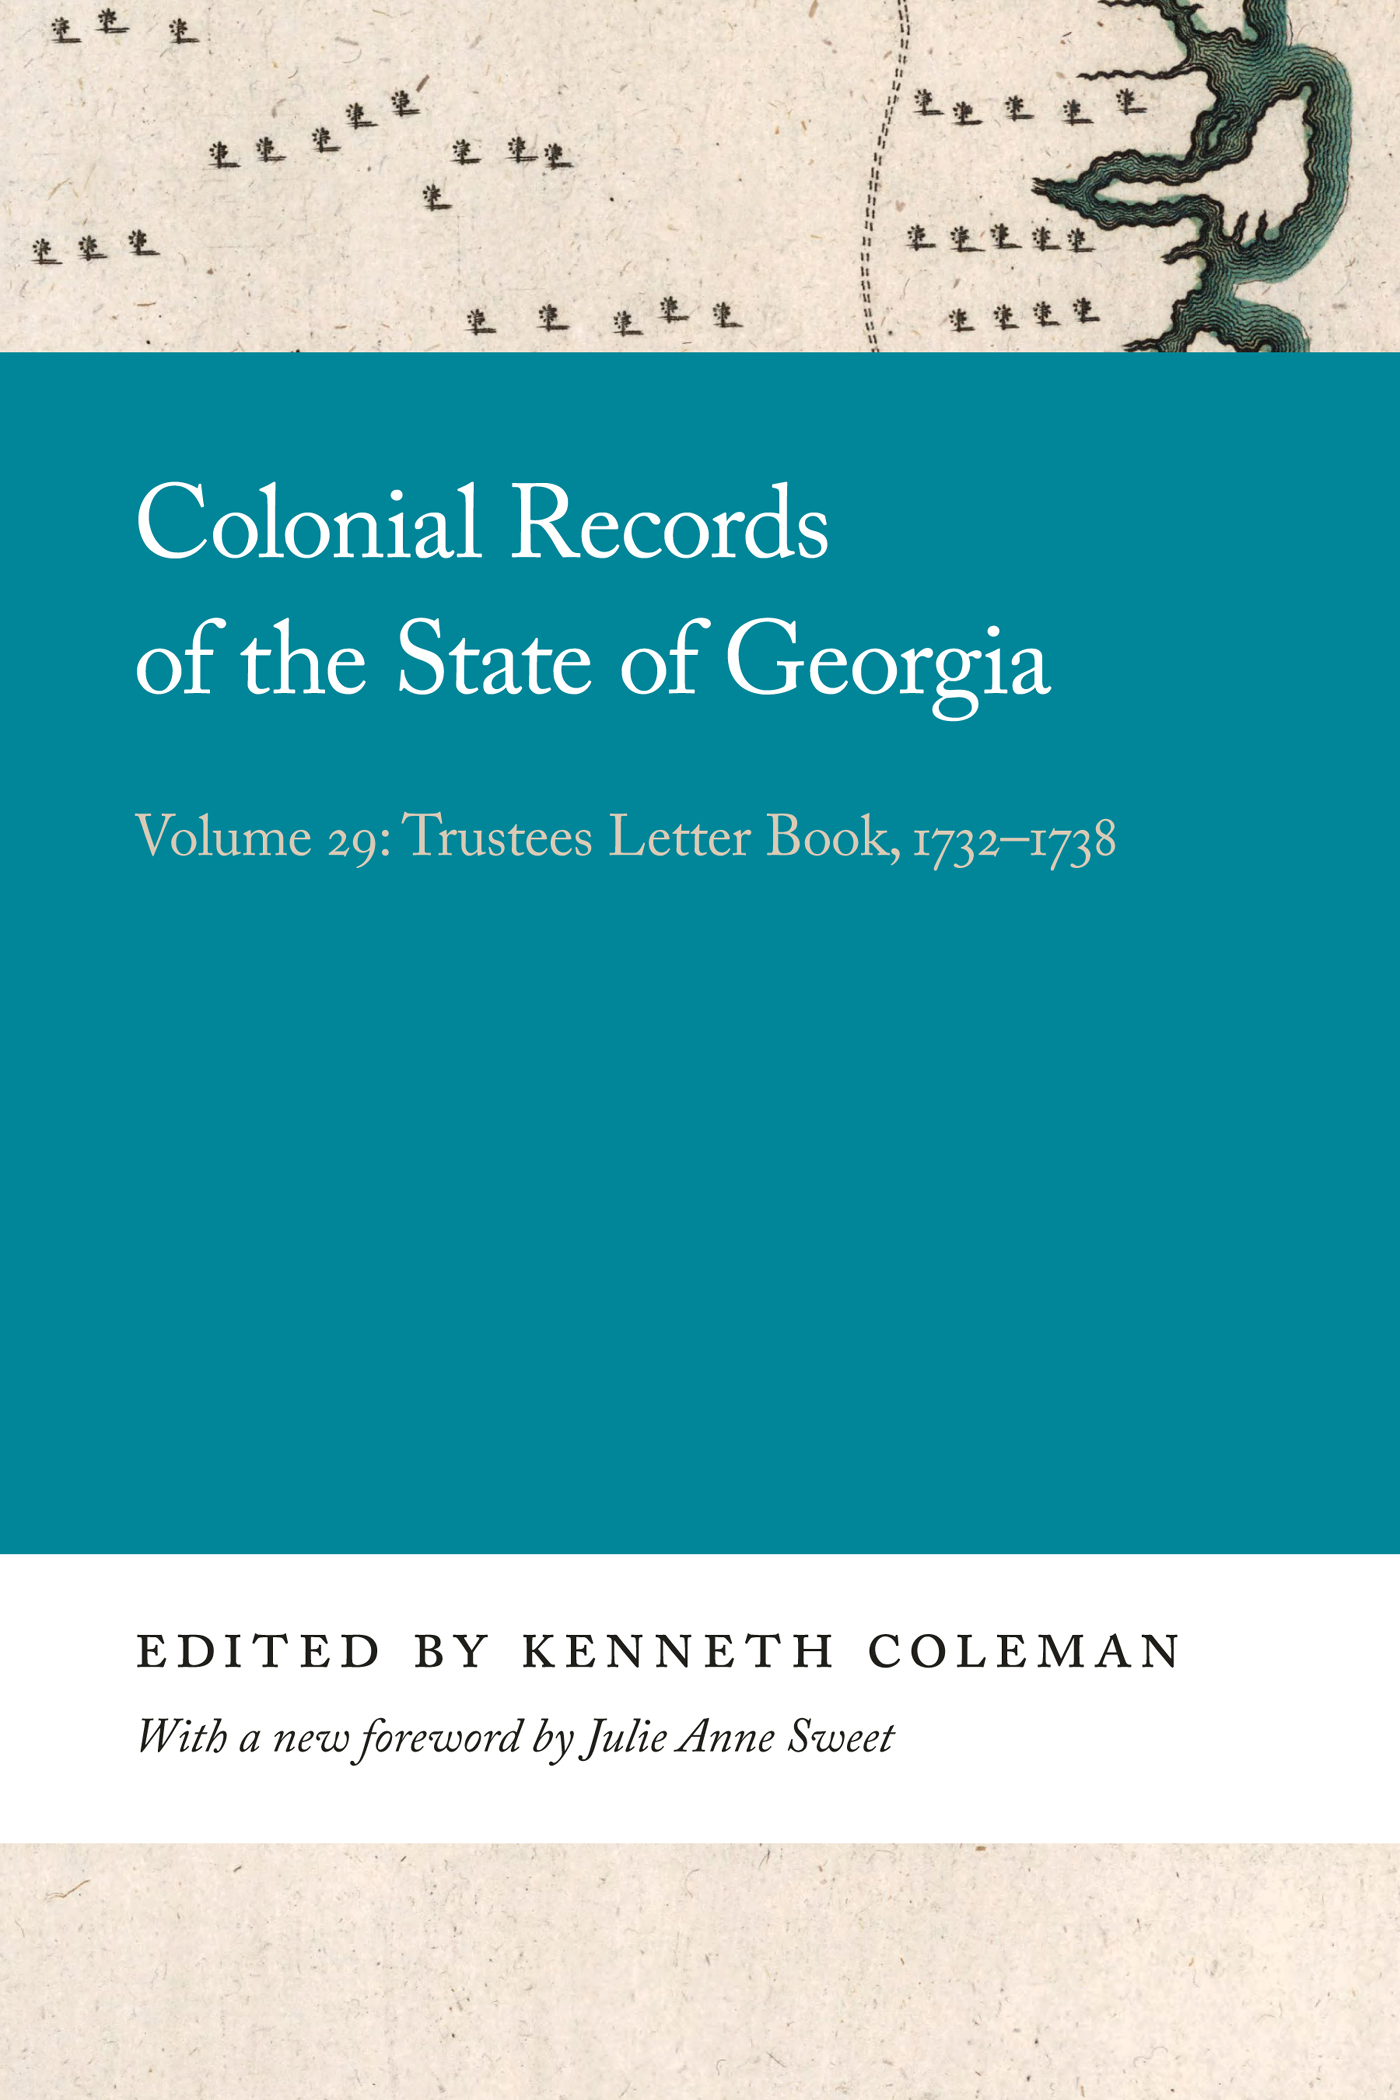 Cover of, Colonial records of the State of Georgia, volume 29 : Trustees letter book, 1732 to 1738.